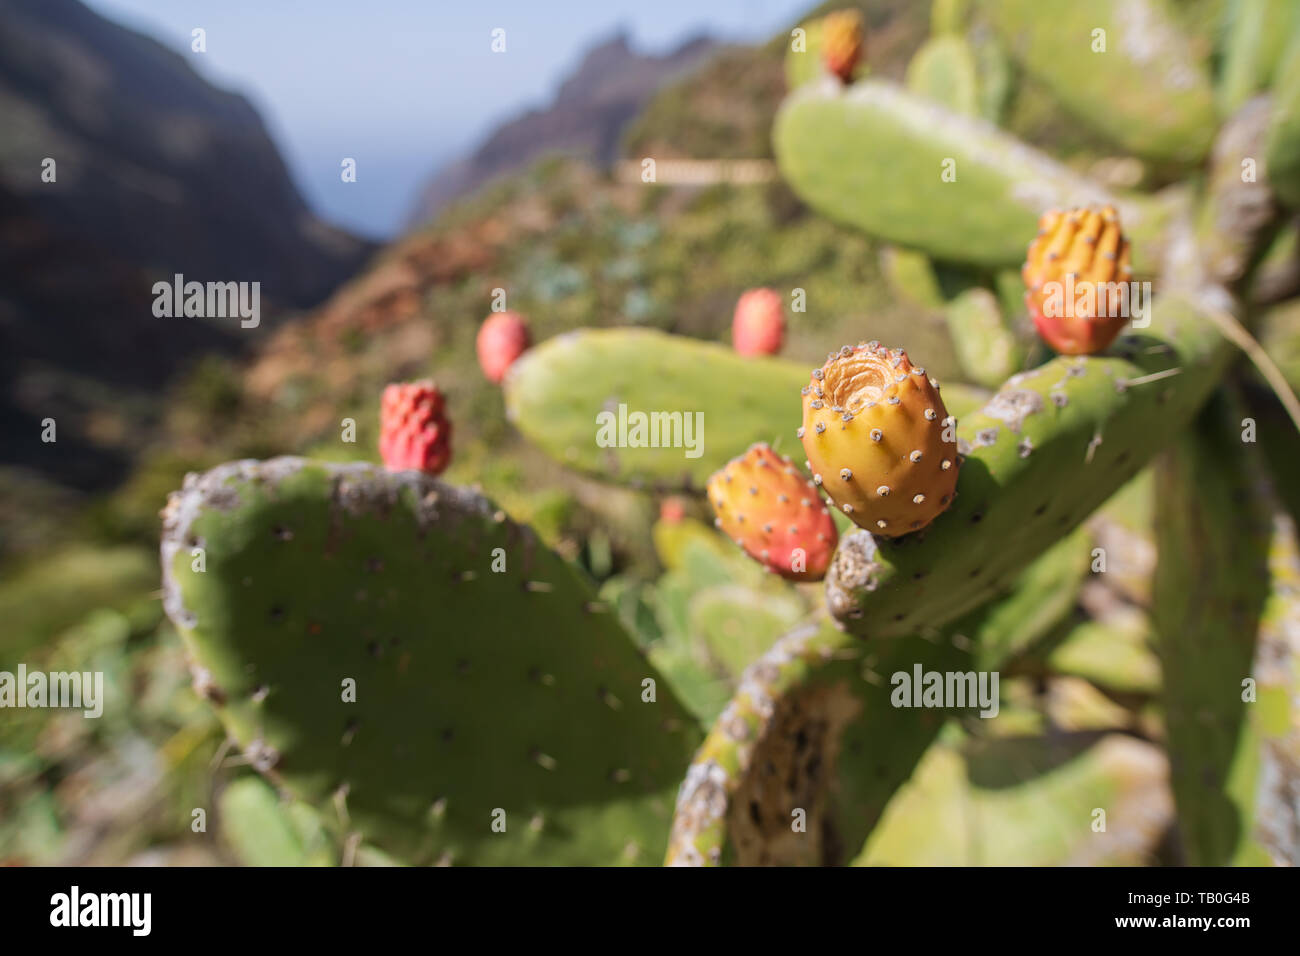 Opuntia ficus-indica, prickly pear, indian fig, ripe tasty fruits. Cactus close-up shot in Tenerife, Canary islands, Spain Stock Photo